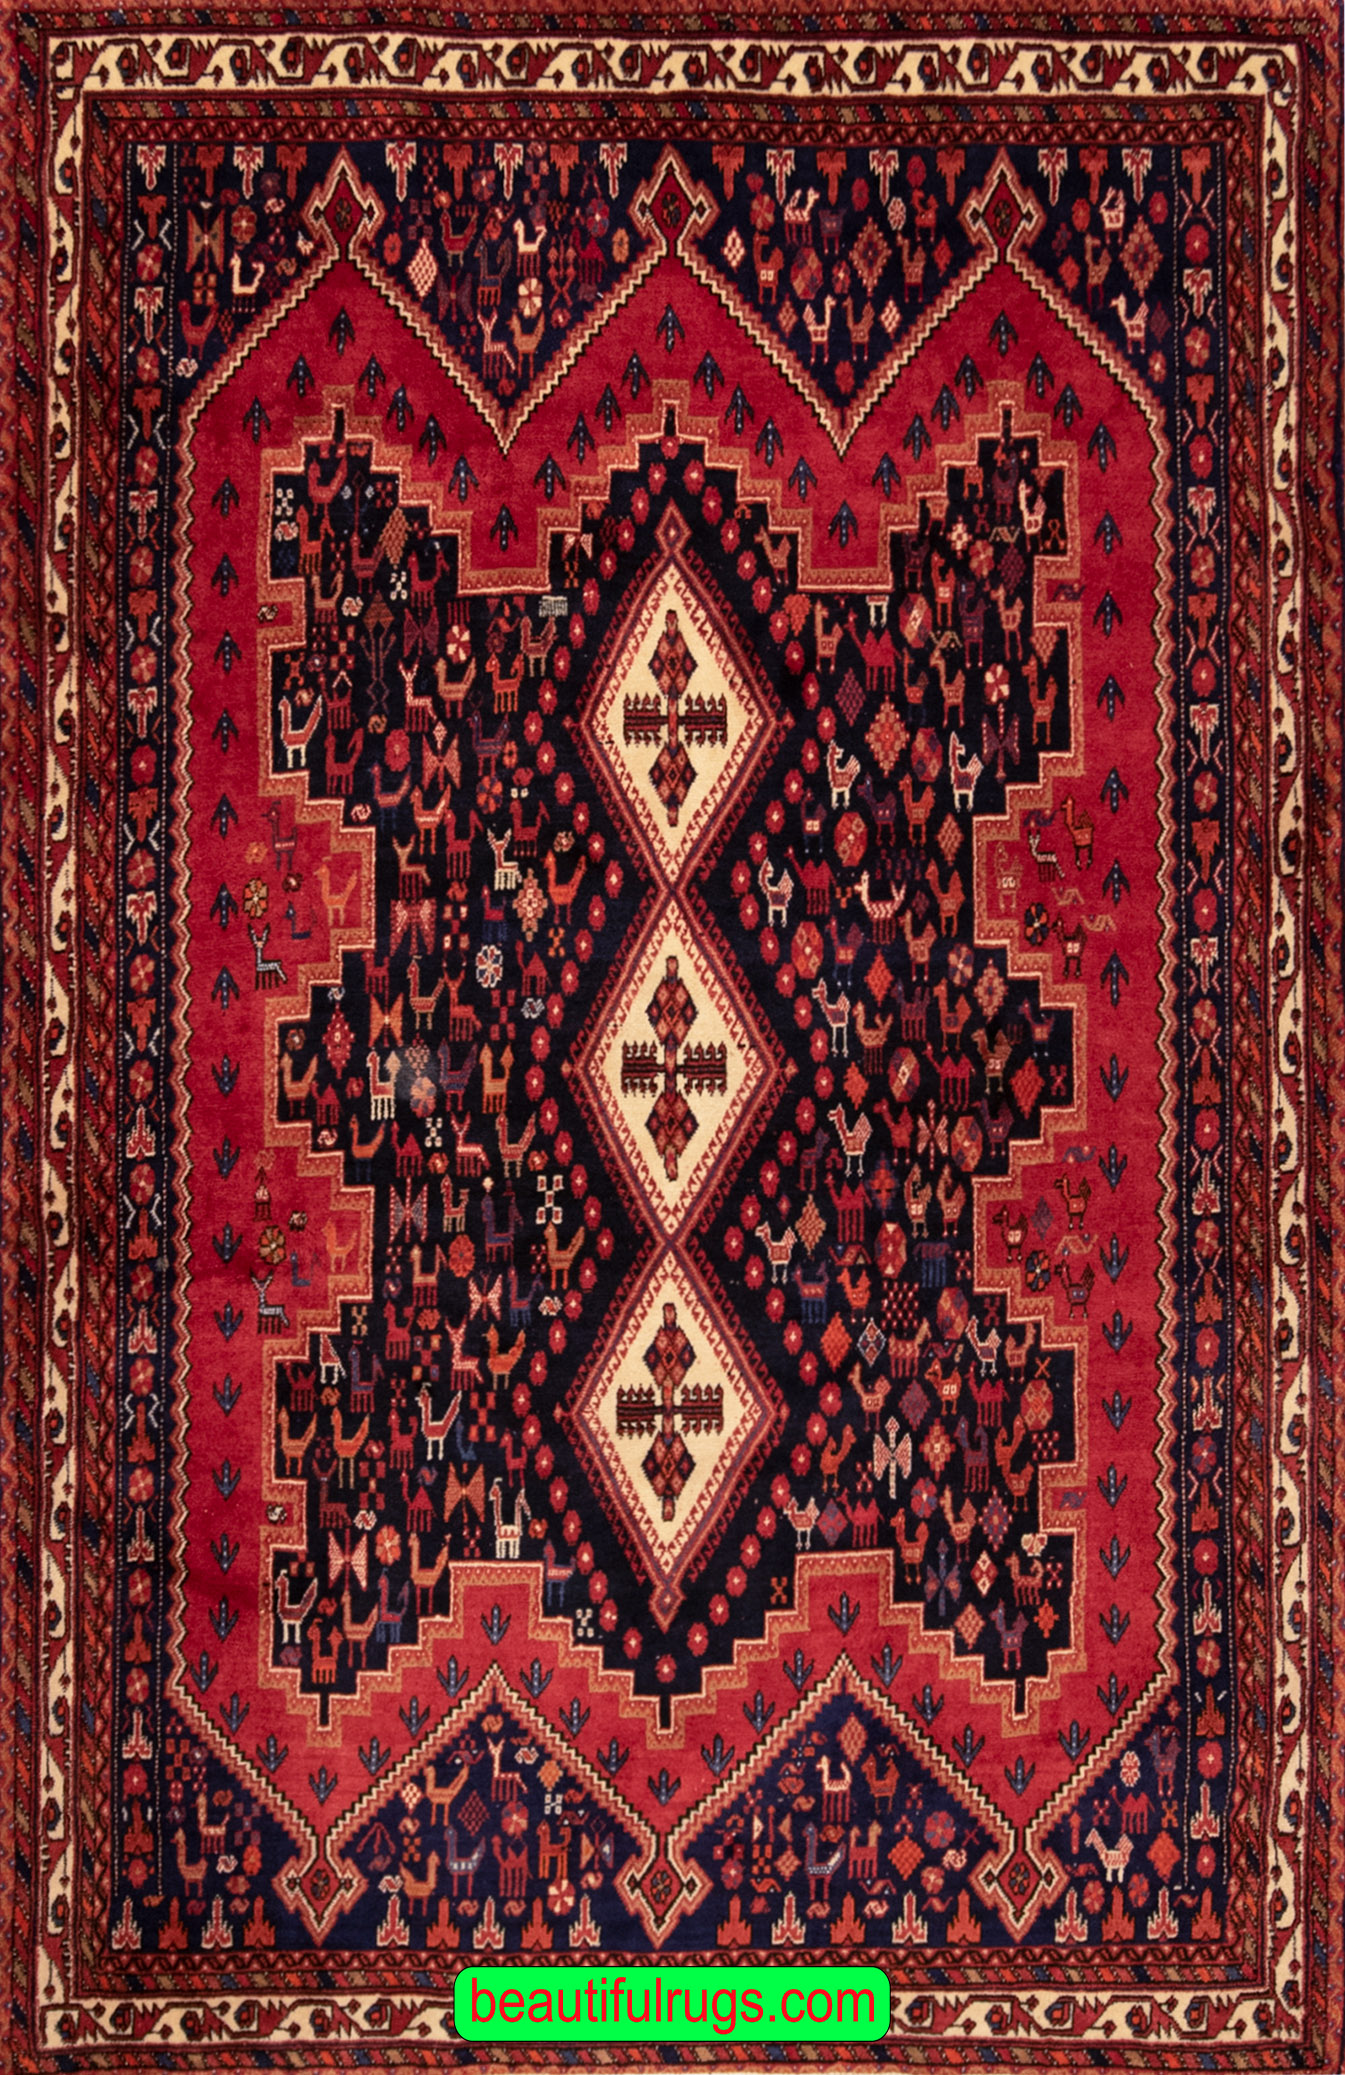 Red color Iranian carpet from Shiraz. Size 5.10x8.10